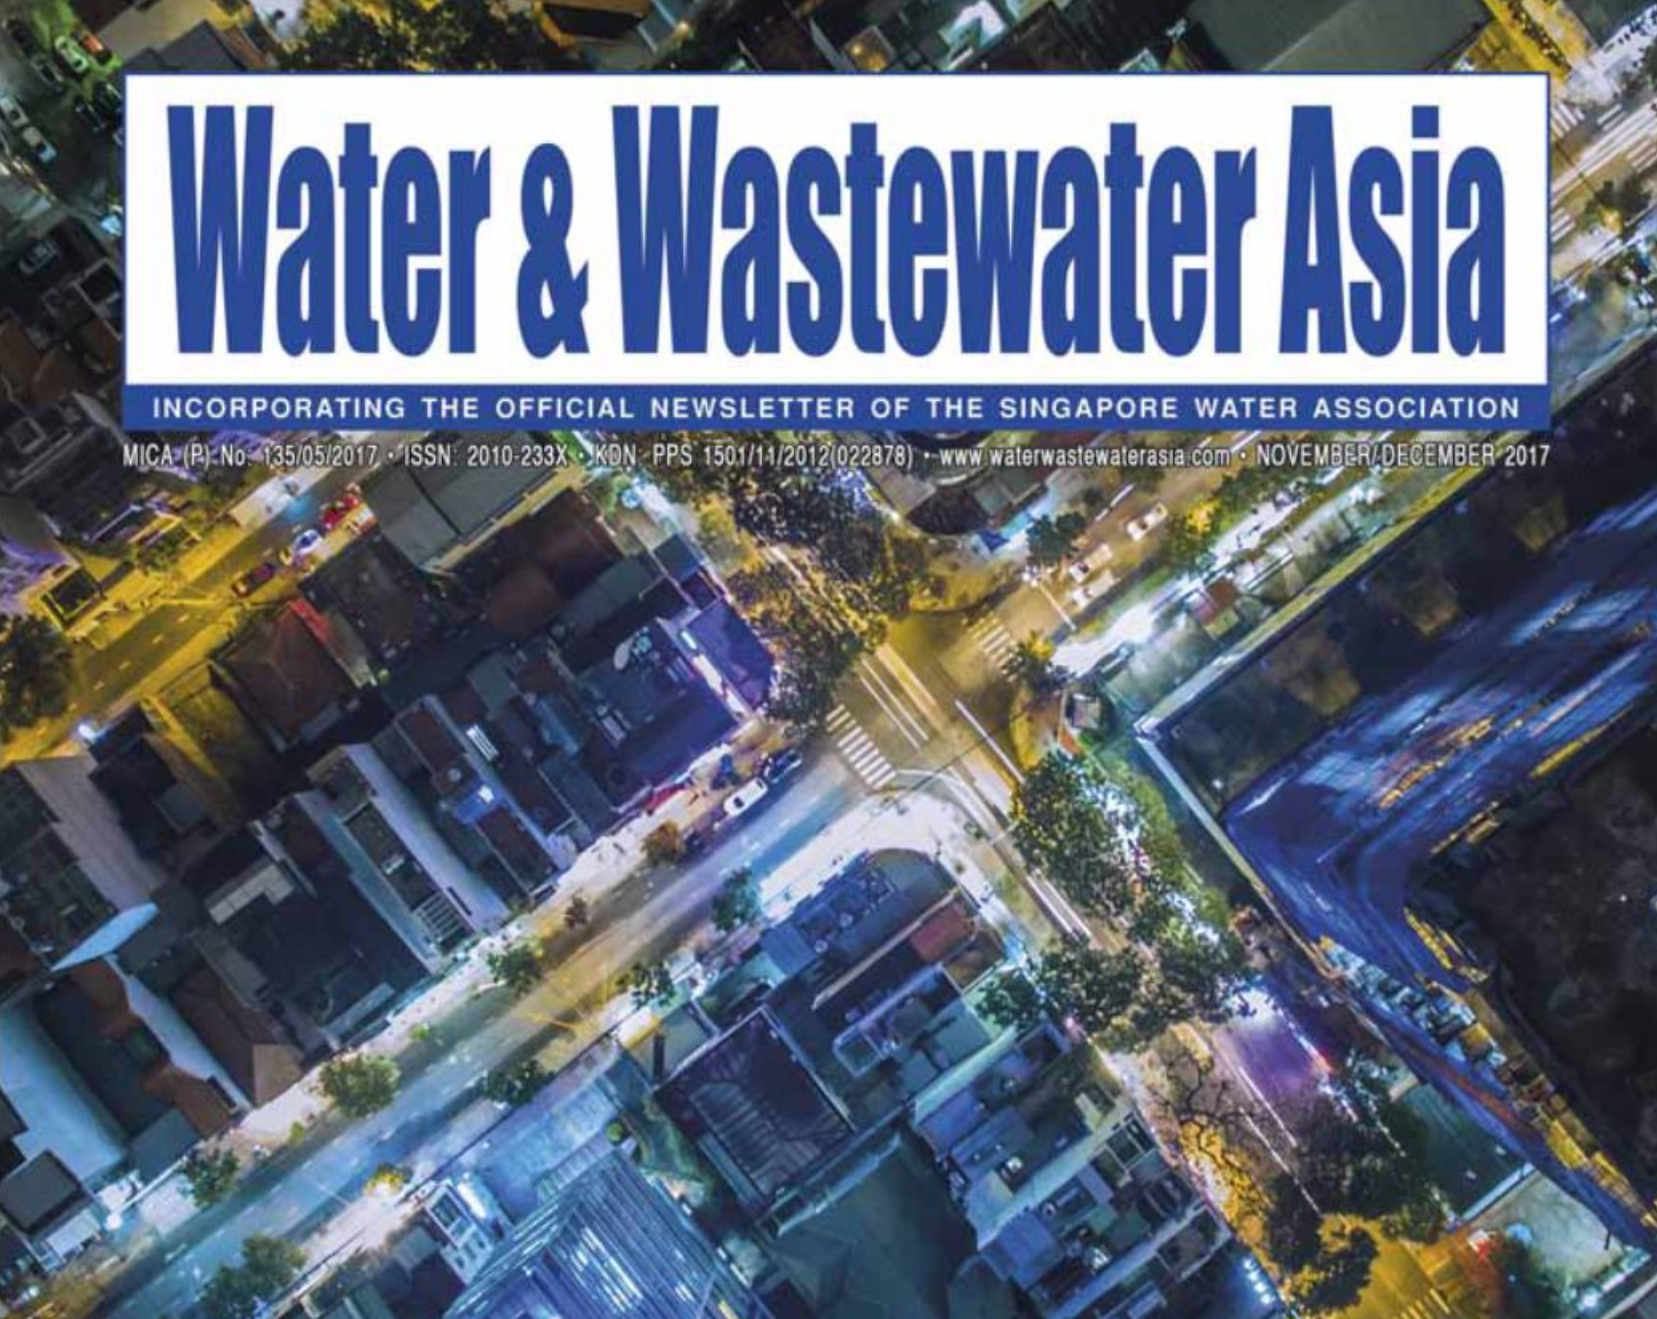 Water & Wastewater Asia features Drylet in Nov/Dec issue